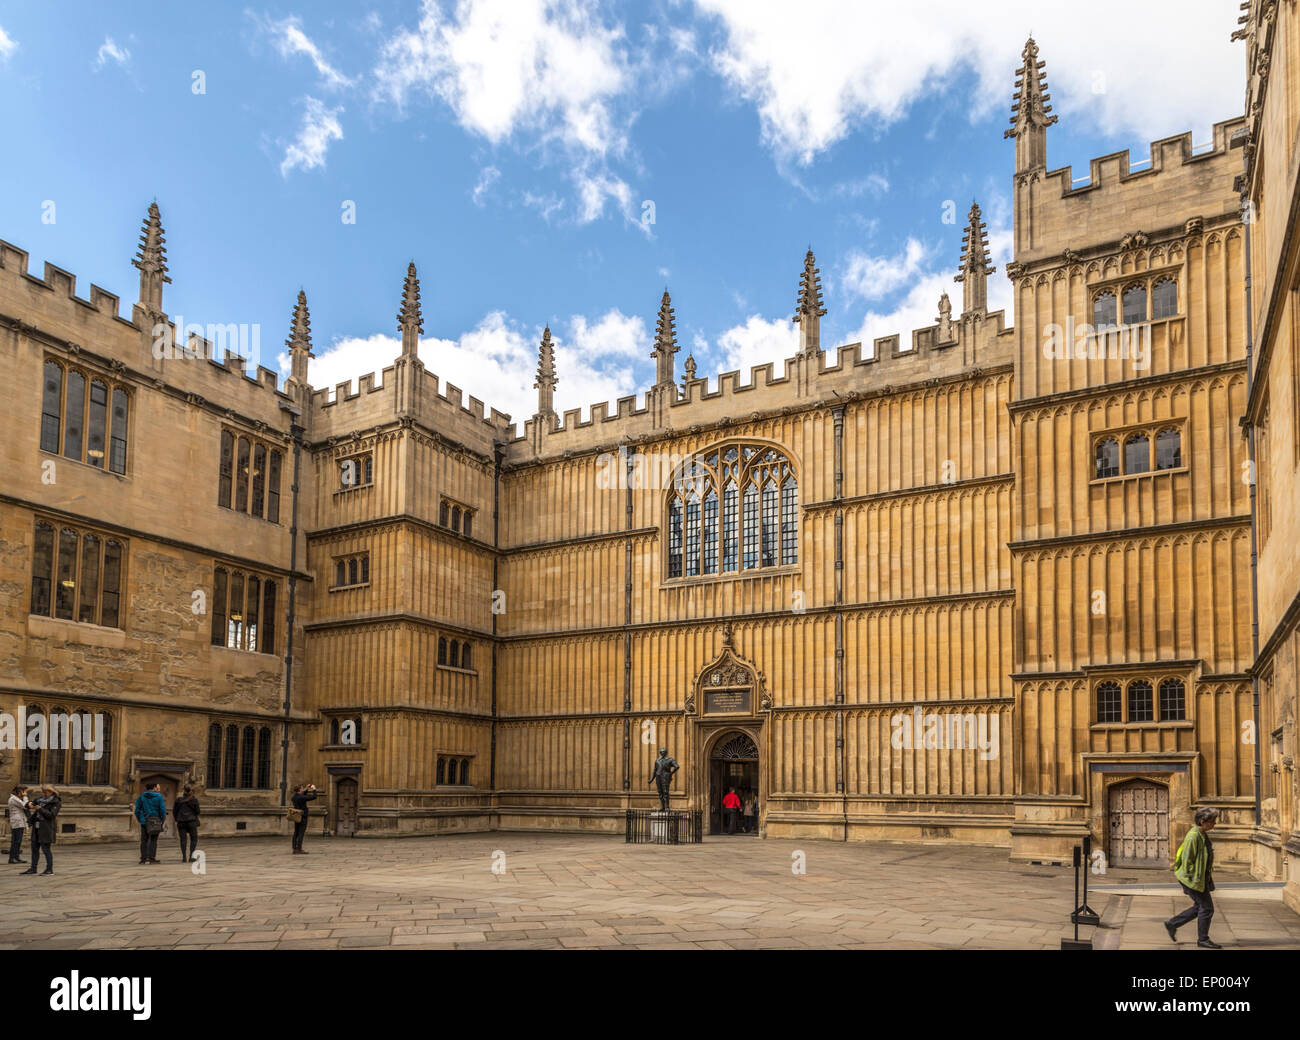 Courtyard view of the Bodleian Library and statue of Sir Thomas Bodley (scholar and founder of the library) Oxford, England, UK. Stock Photo